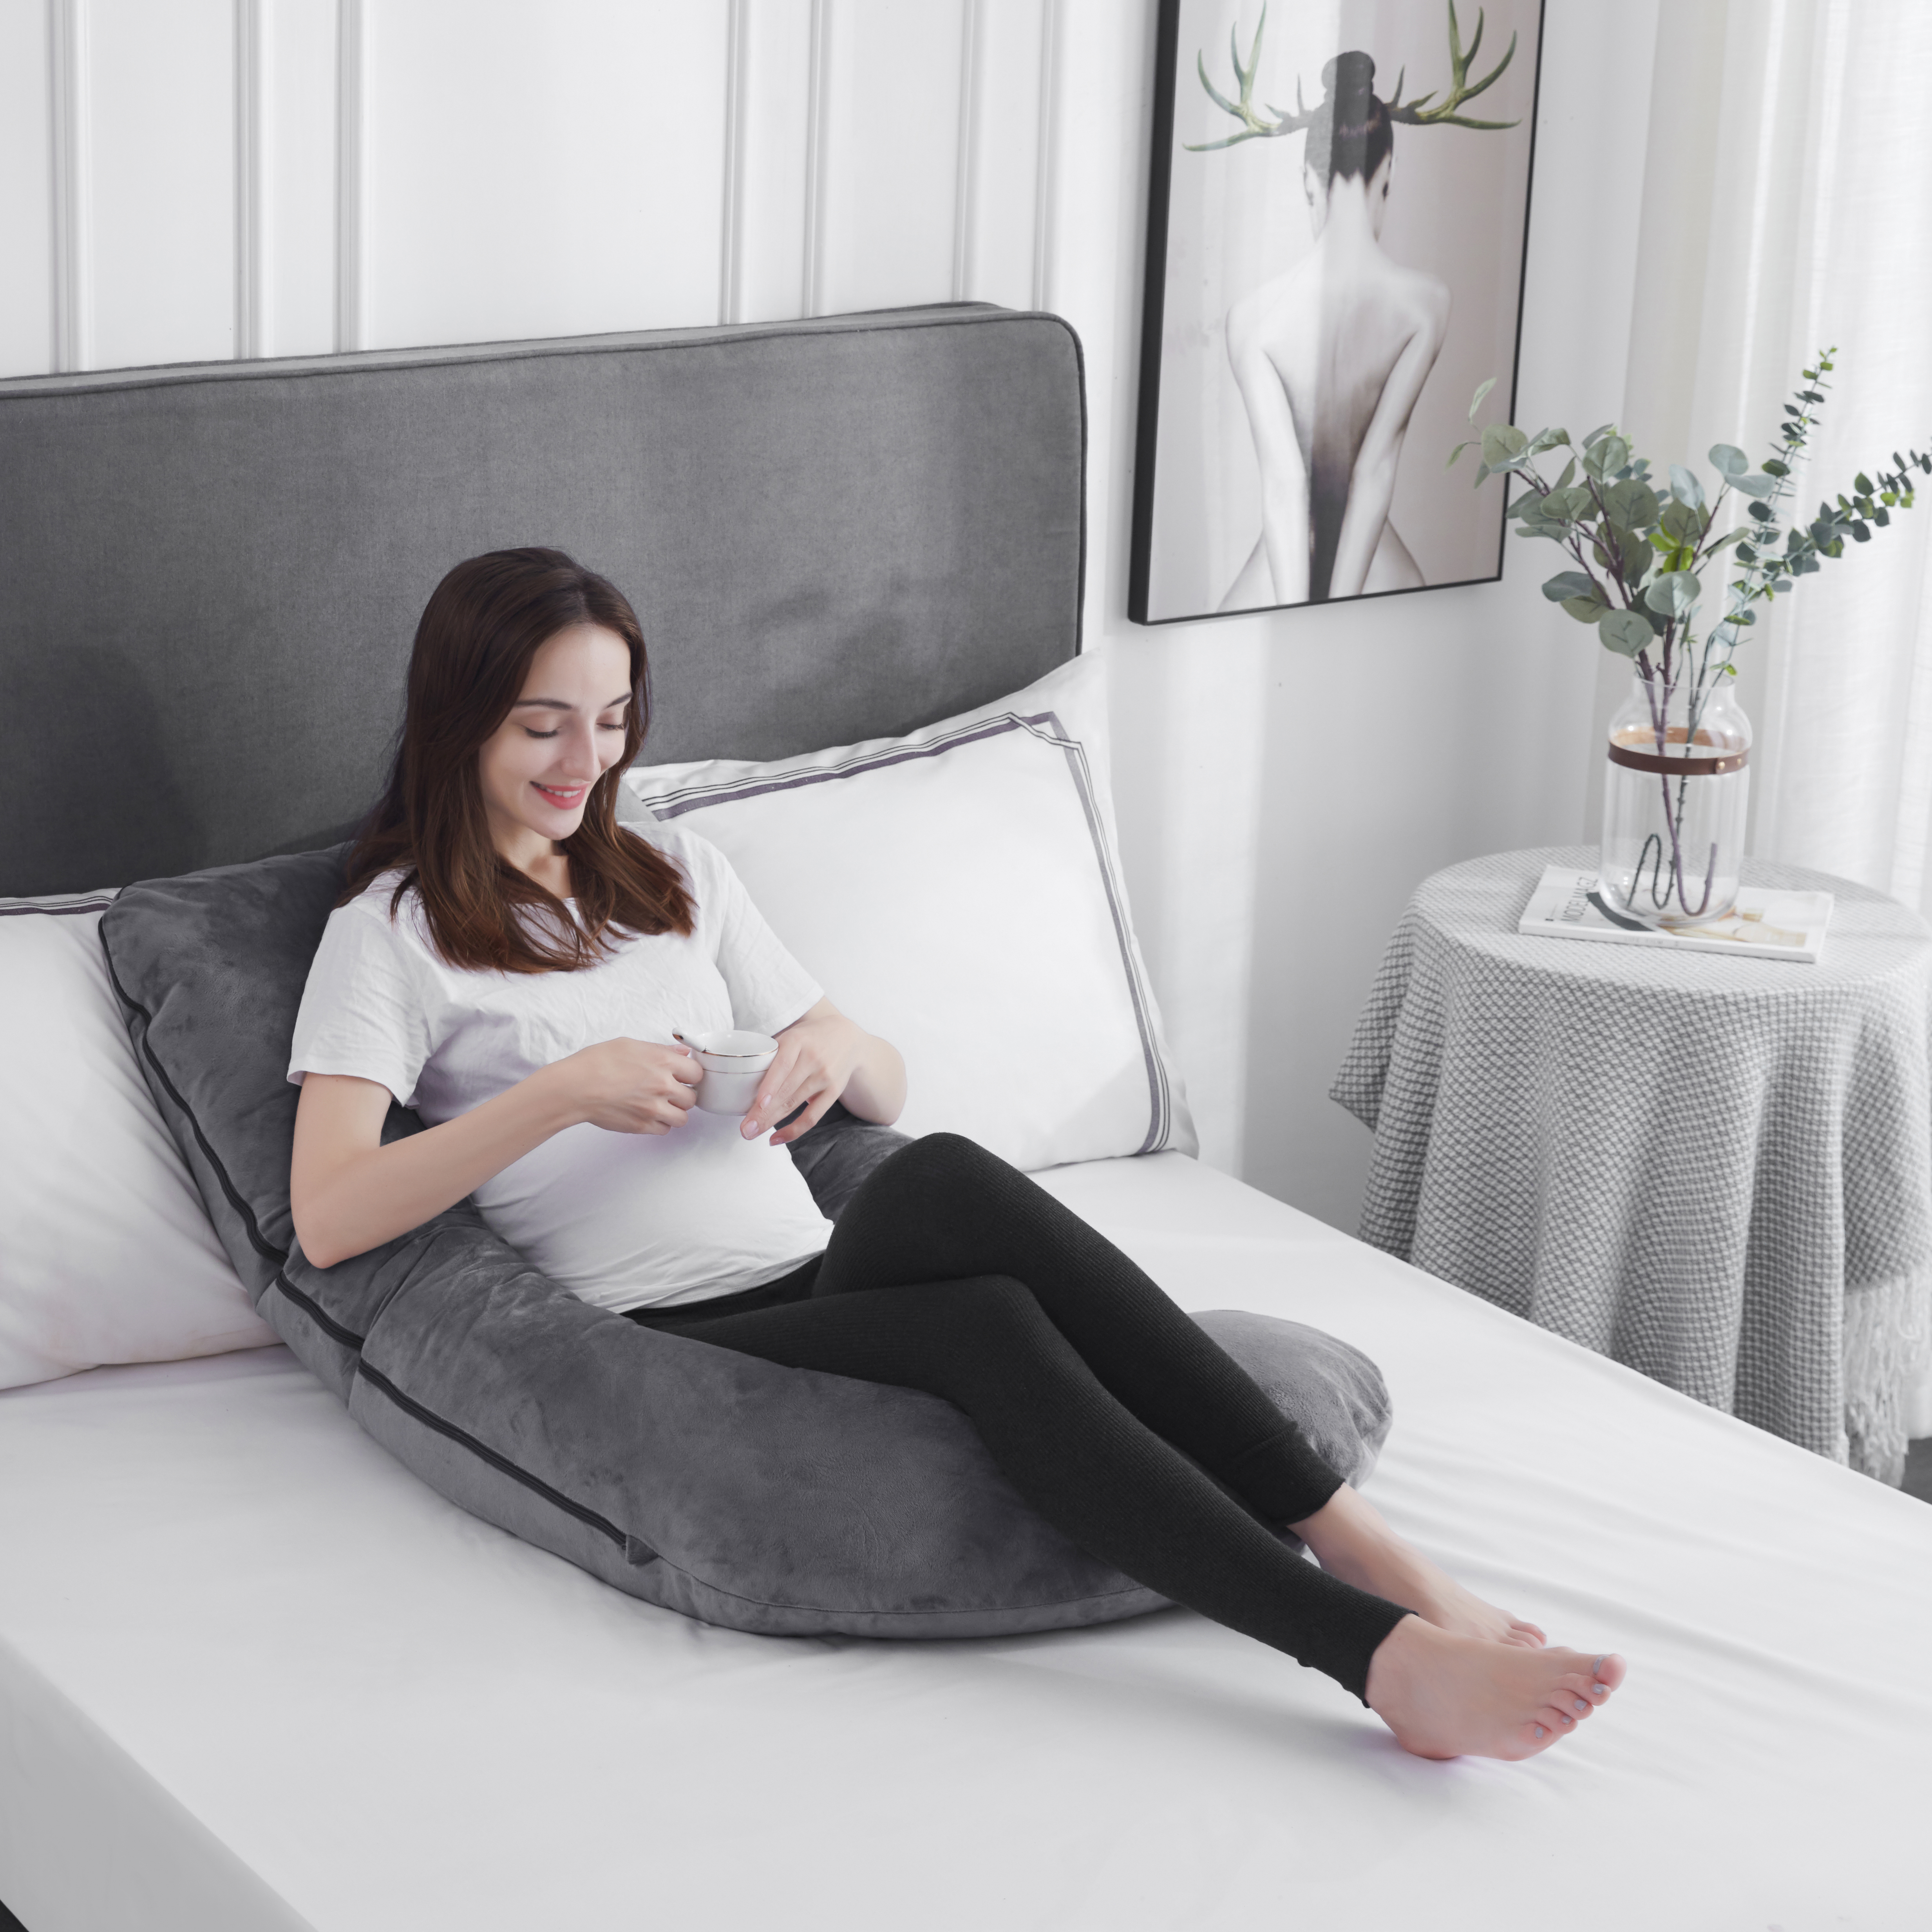 High Quality Outdoor Pillow Inserts Manufacturer –  Pregnancy Pillow for Sleeping U Shaped Pregnancy Full Body Pillow Maternity Support Pillow for Pregnant Women – HANYUN